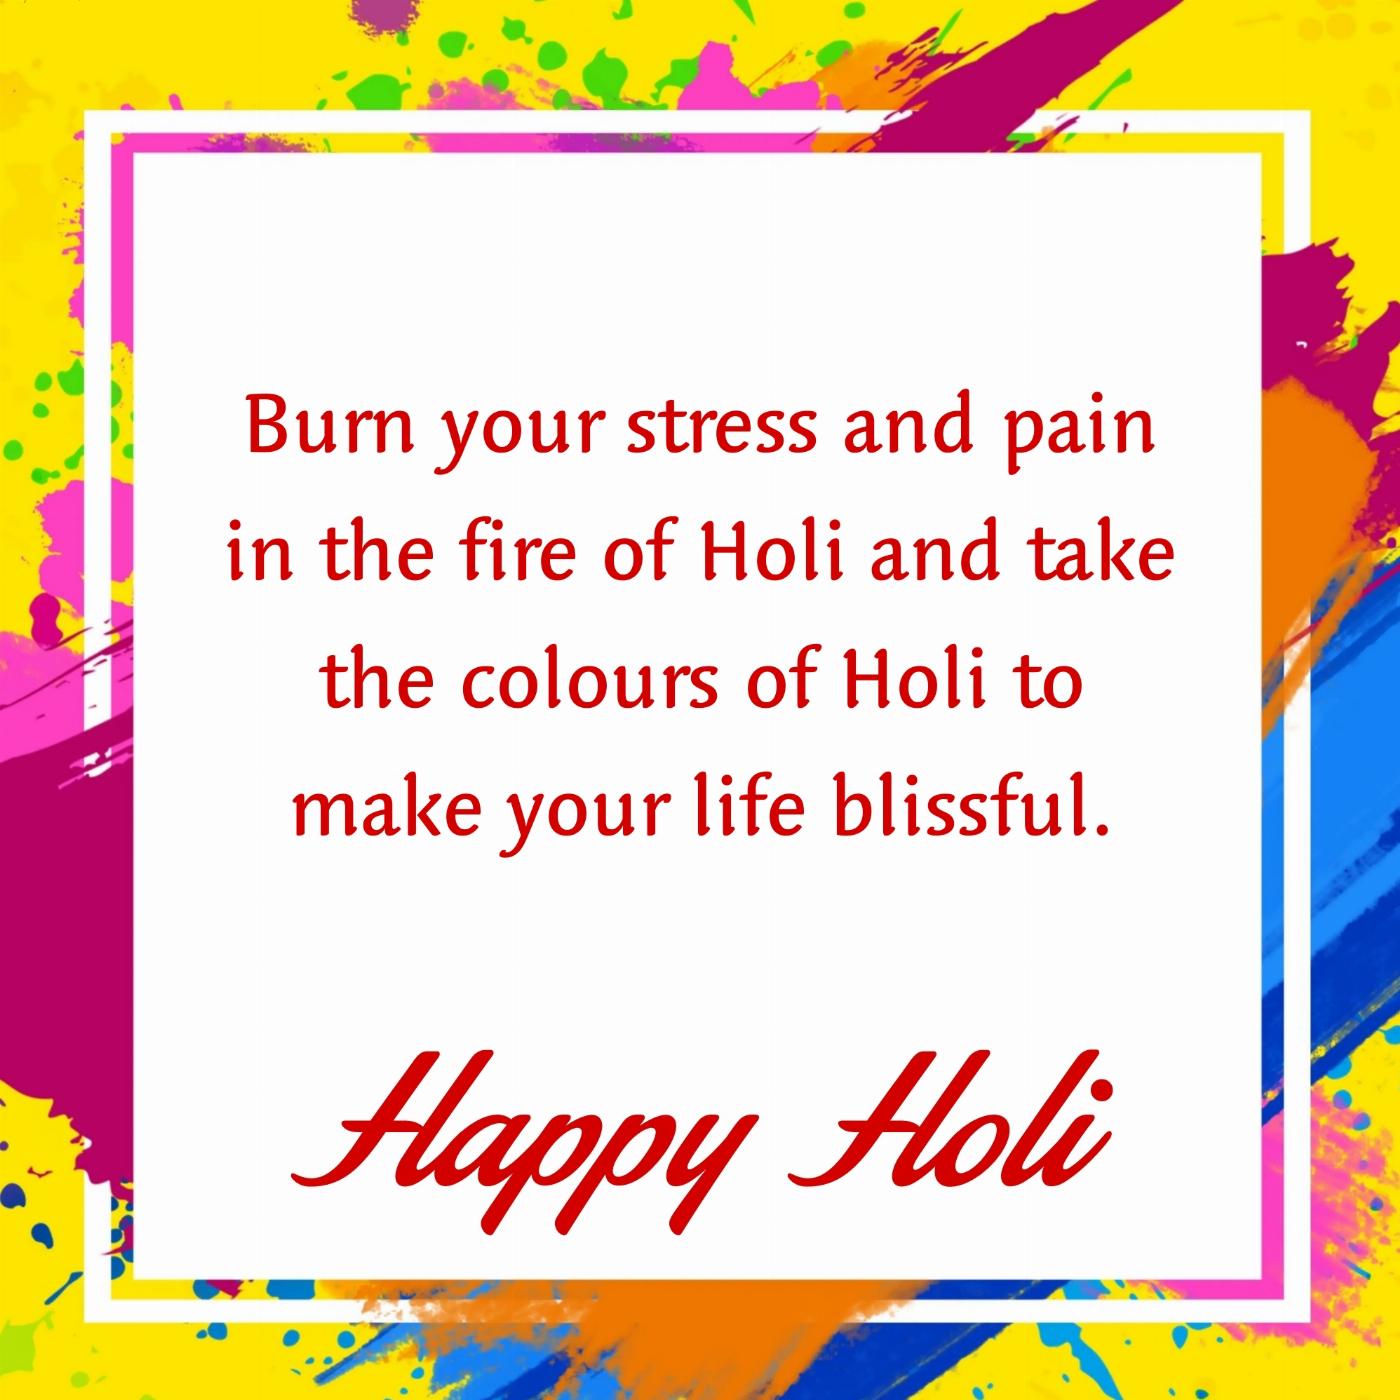 Burn your stress and pain in the fire of Holi and take the colours